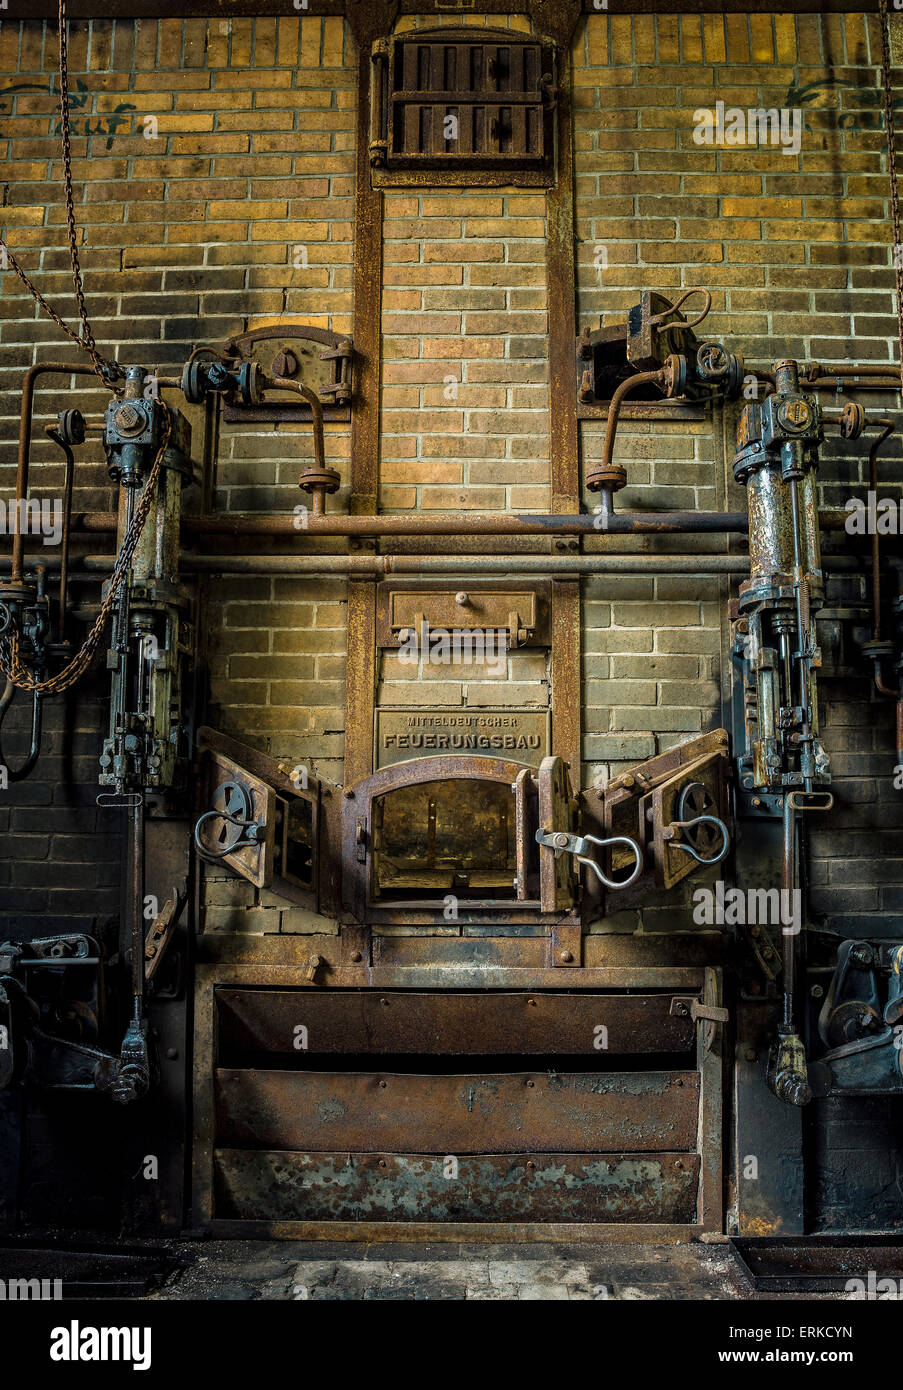 Disused firing furnace in the old briquetting plant Louise, Domsdorf, Brandenburg, Germany Stock Photo